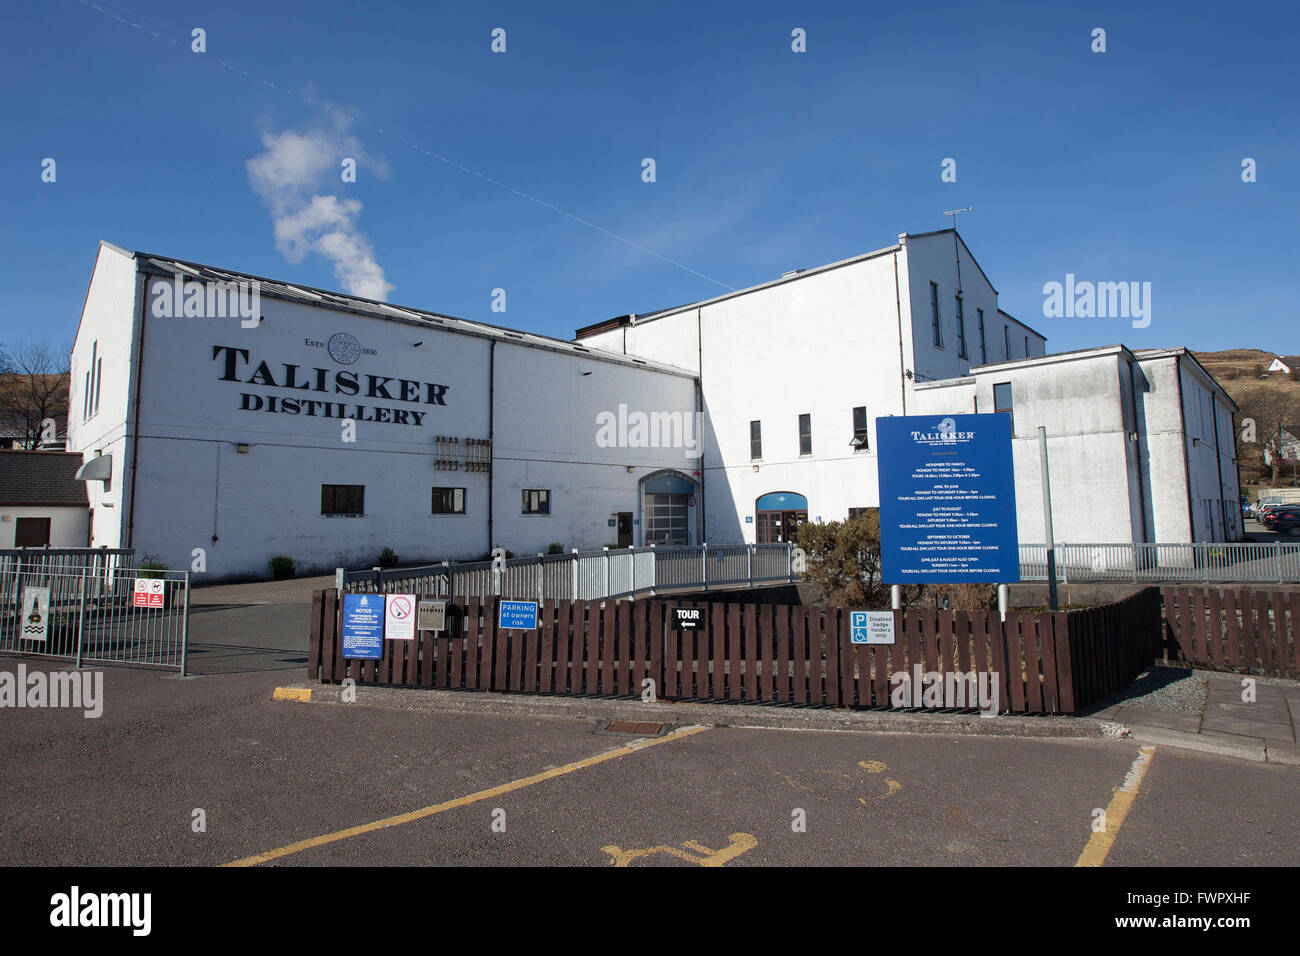 Talisker distillery. Single malt Scotch whisky distillery based in Carbost, Scotland the only distillery on the Isle Stock Photo